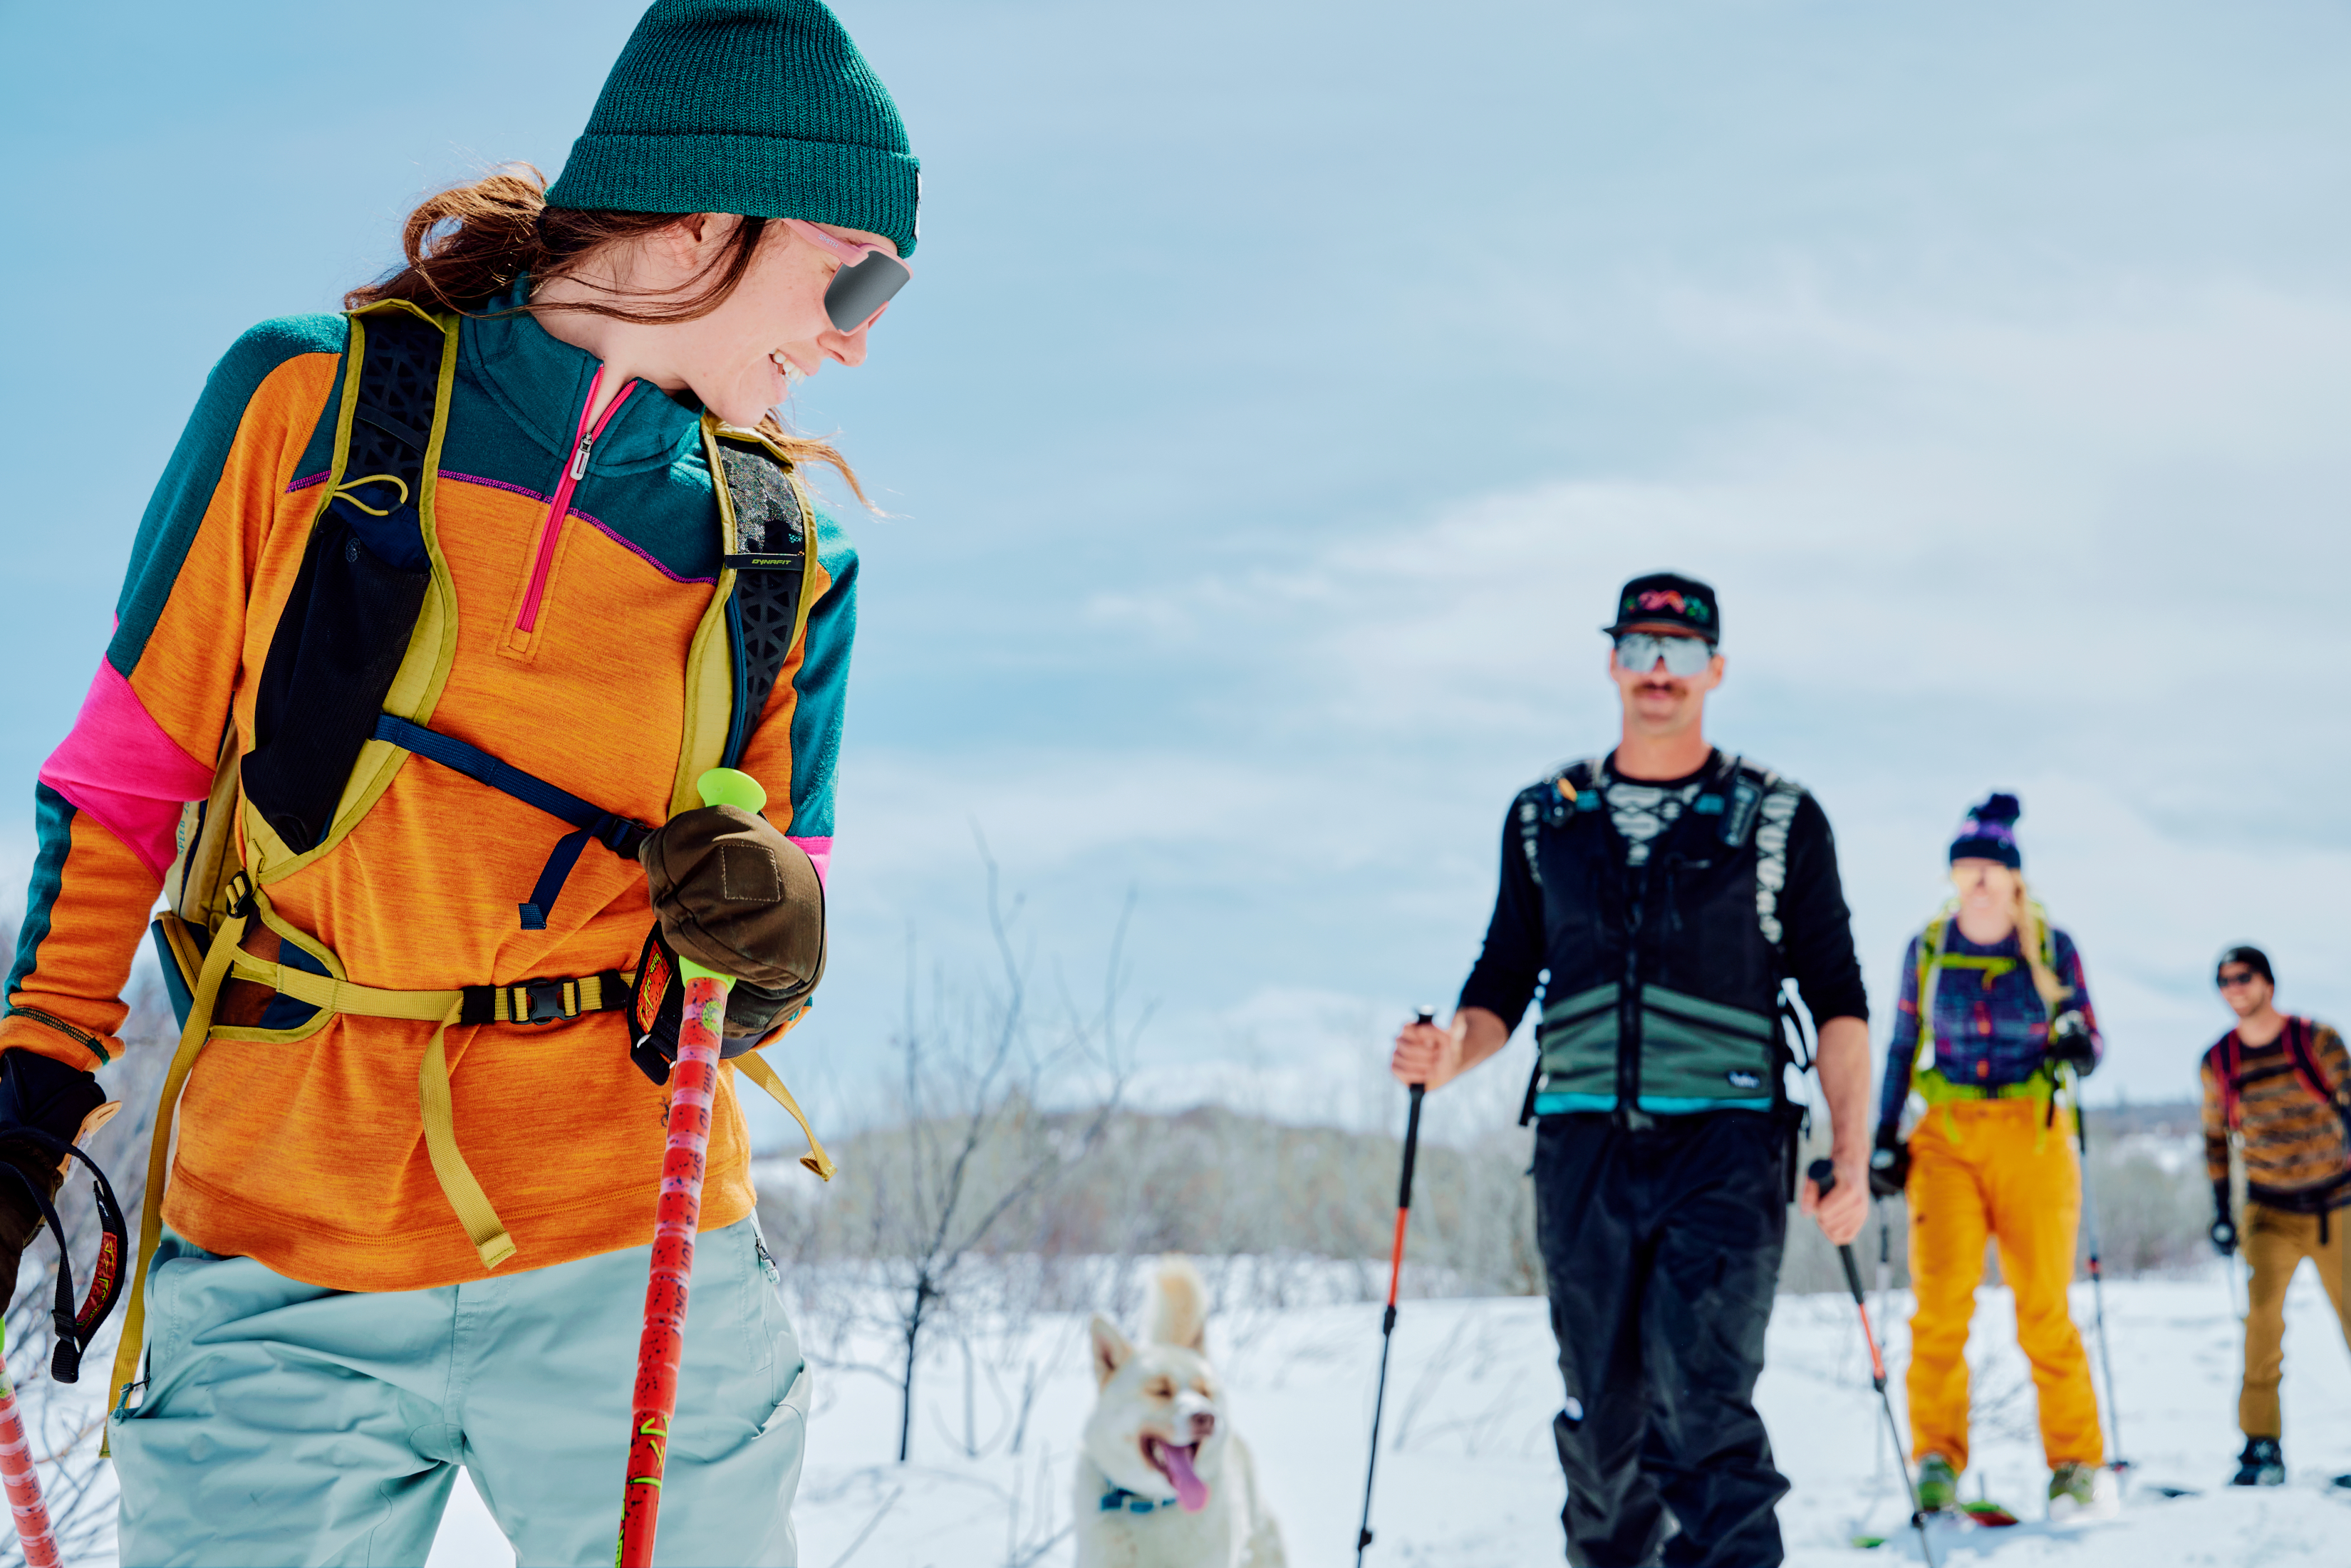 Winter Base: Let Smartwool Performance Apparel Keep You Warm & Dry